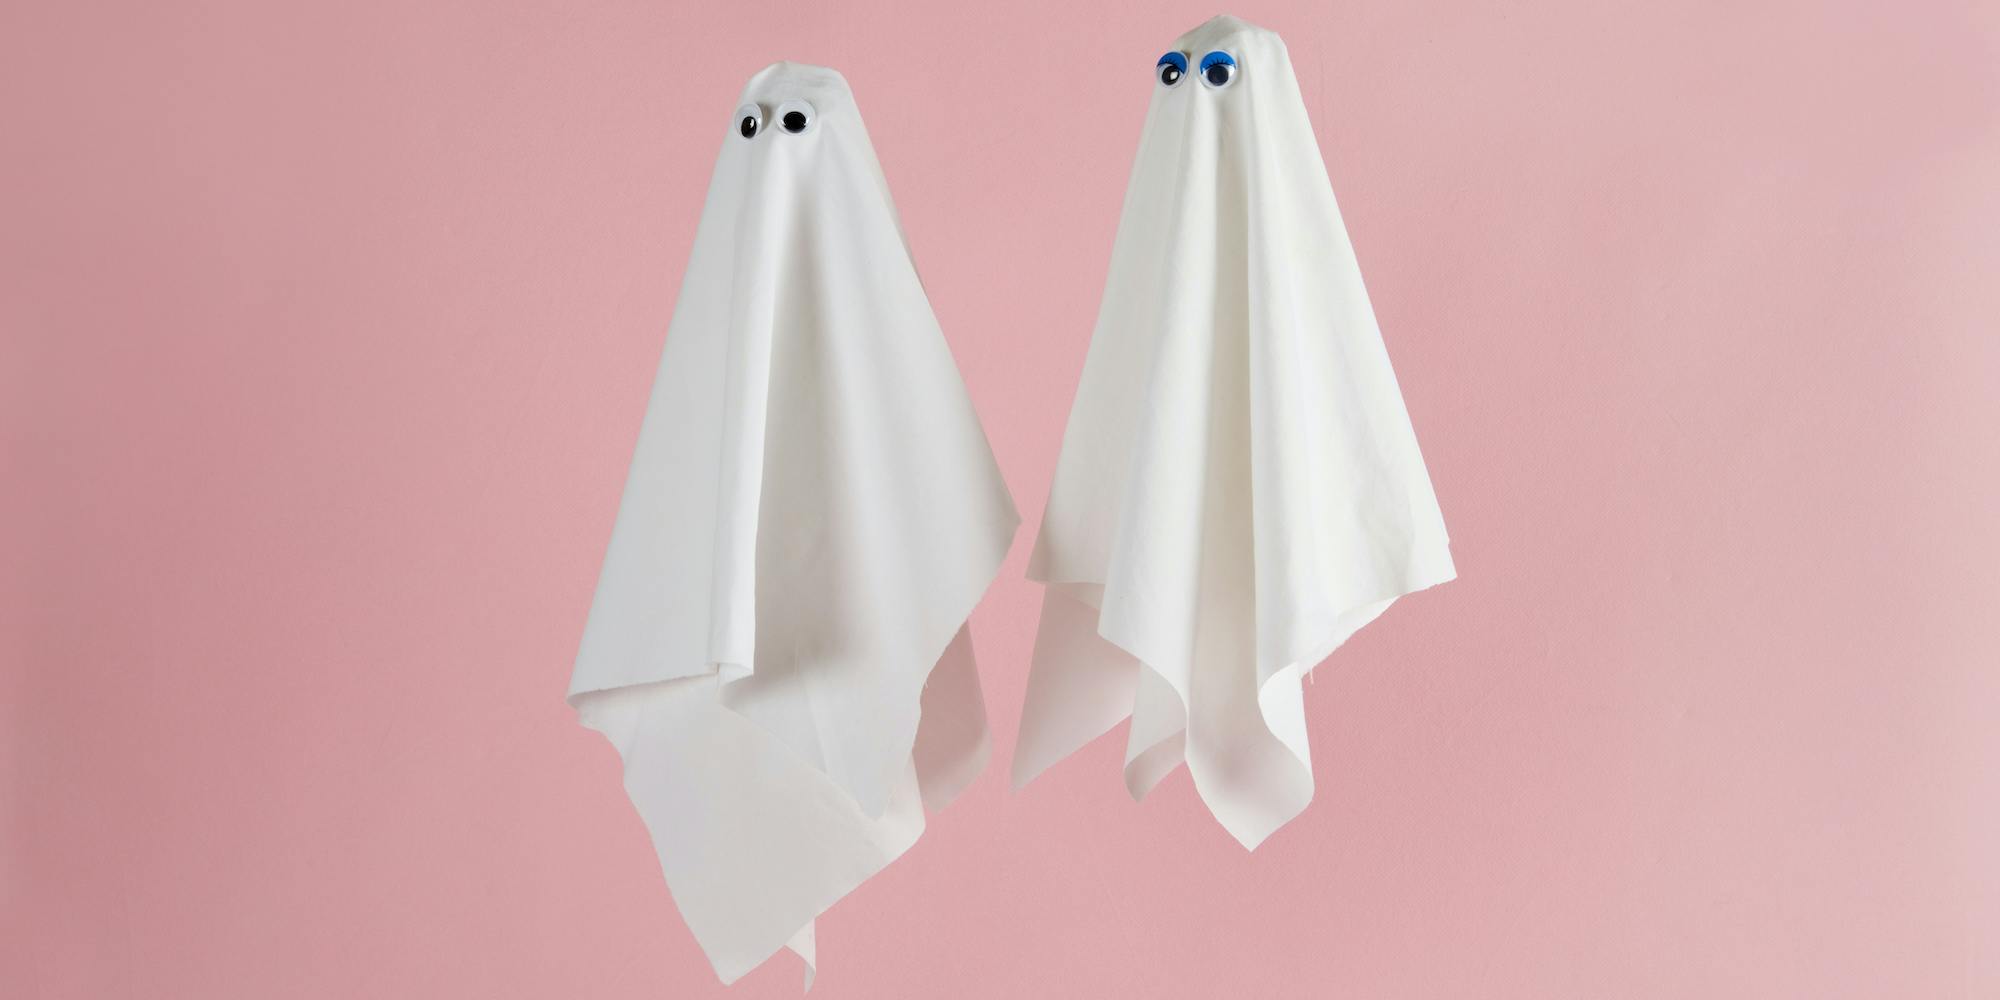 Couple of white sheet ghost with doll's eyes isolated on a pink background. Minimal pop still life photography